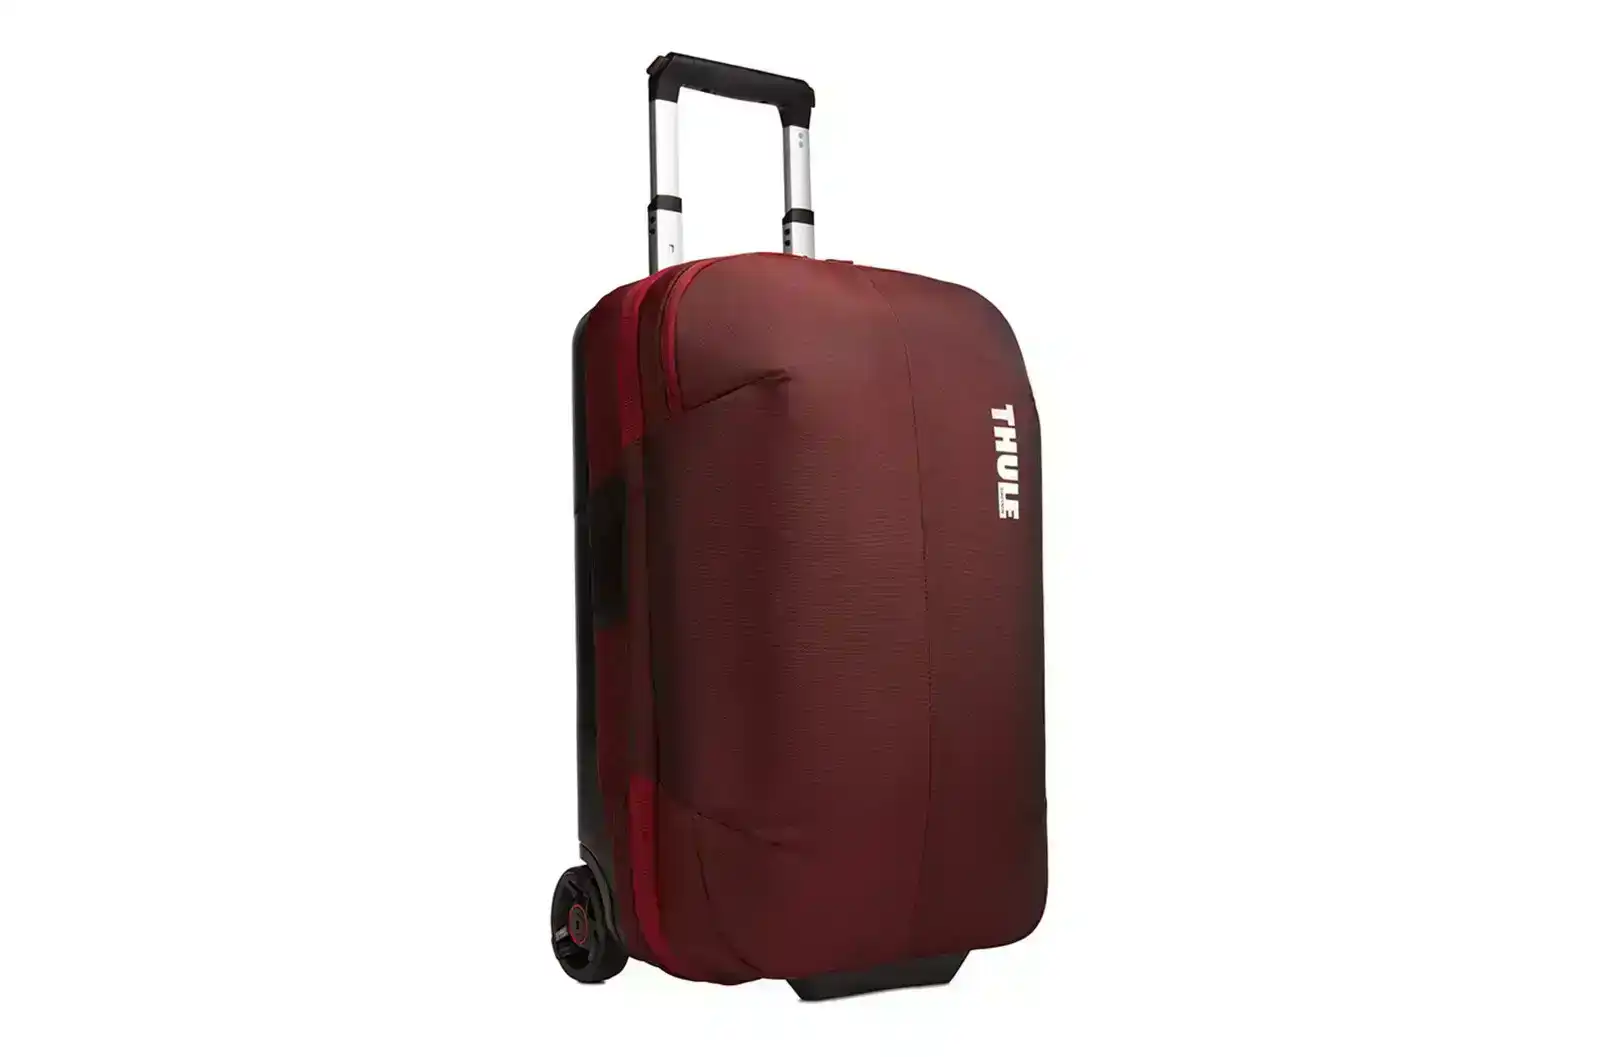 Thule Subterra 36L/55cm Rolling Carry On Travel Luggage Nylon Suitcase Bag Ember